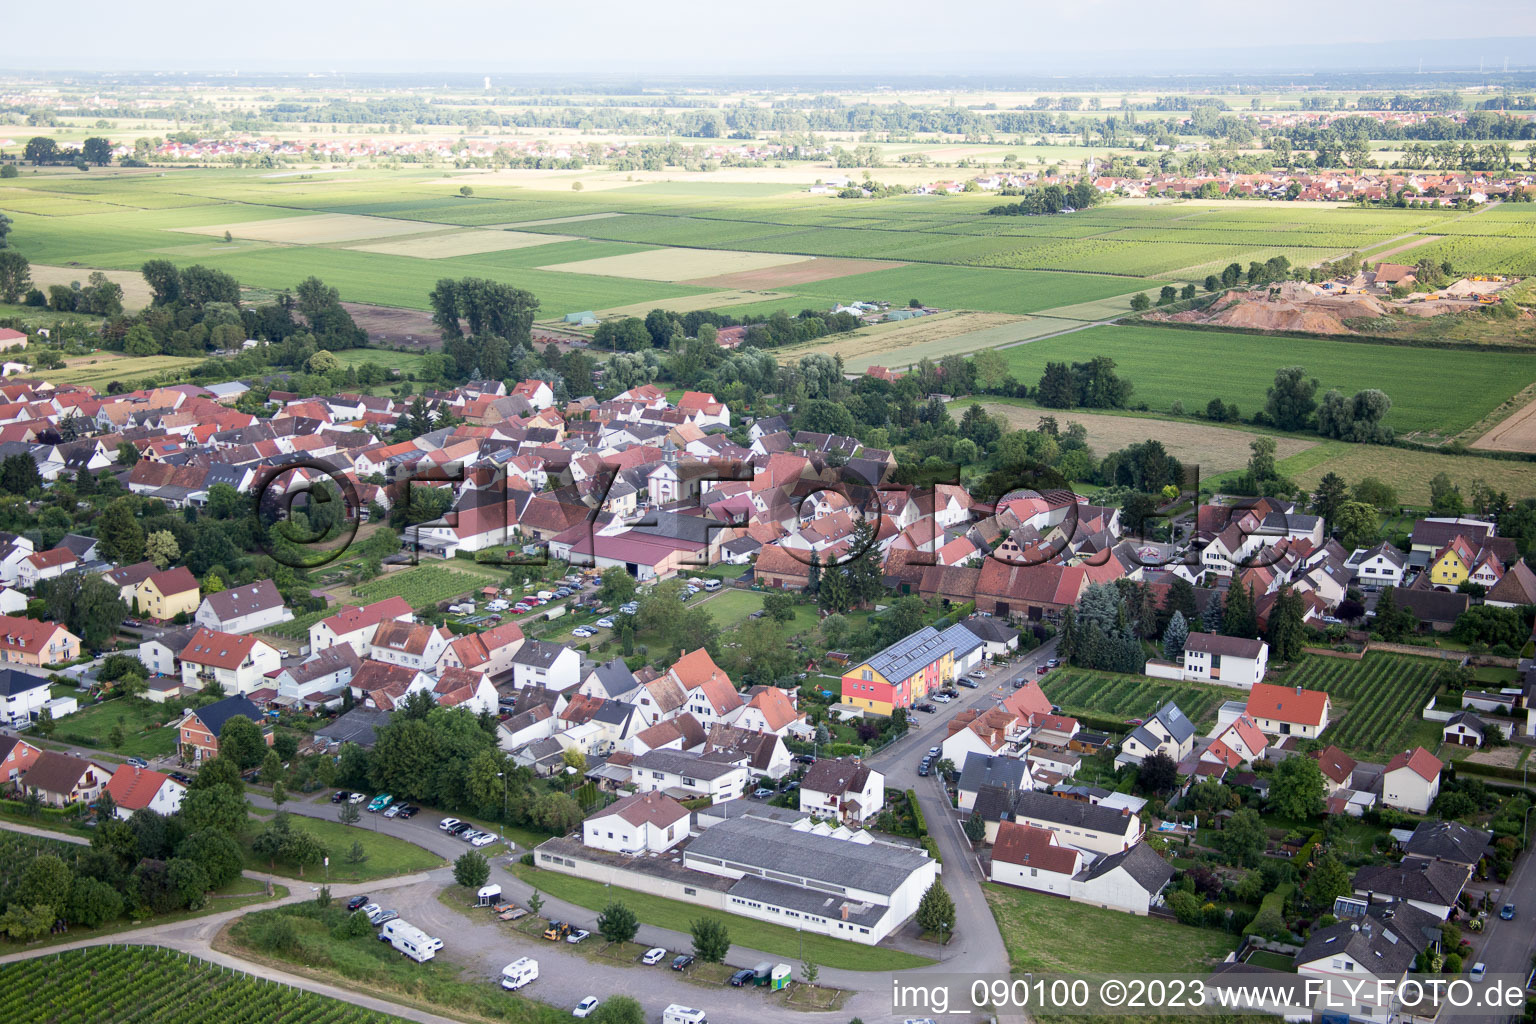 District Duttweiler in Neustadt an der Weinstraße in the state Rhineland-Palatinate, Germany from the drone perspective